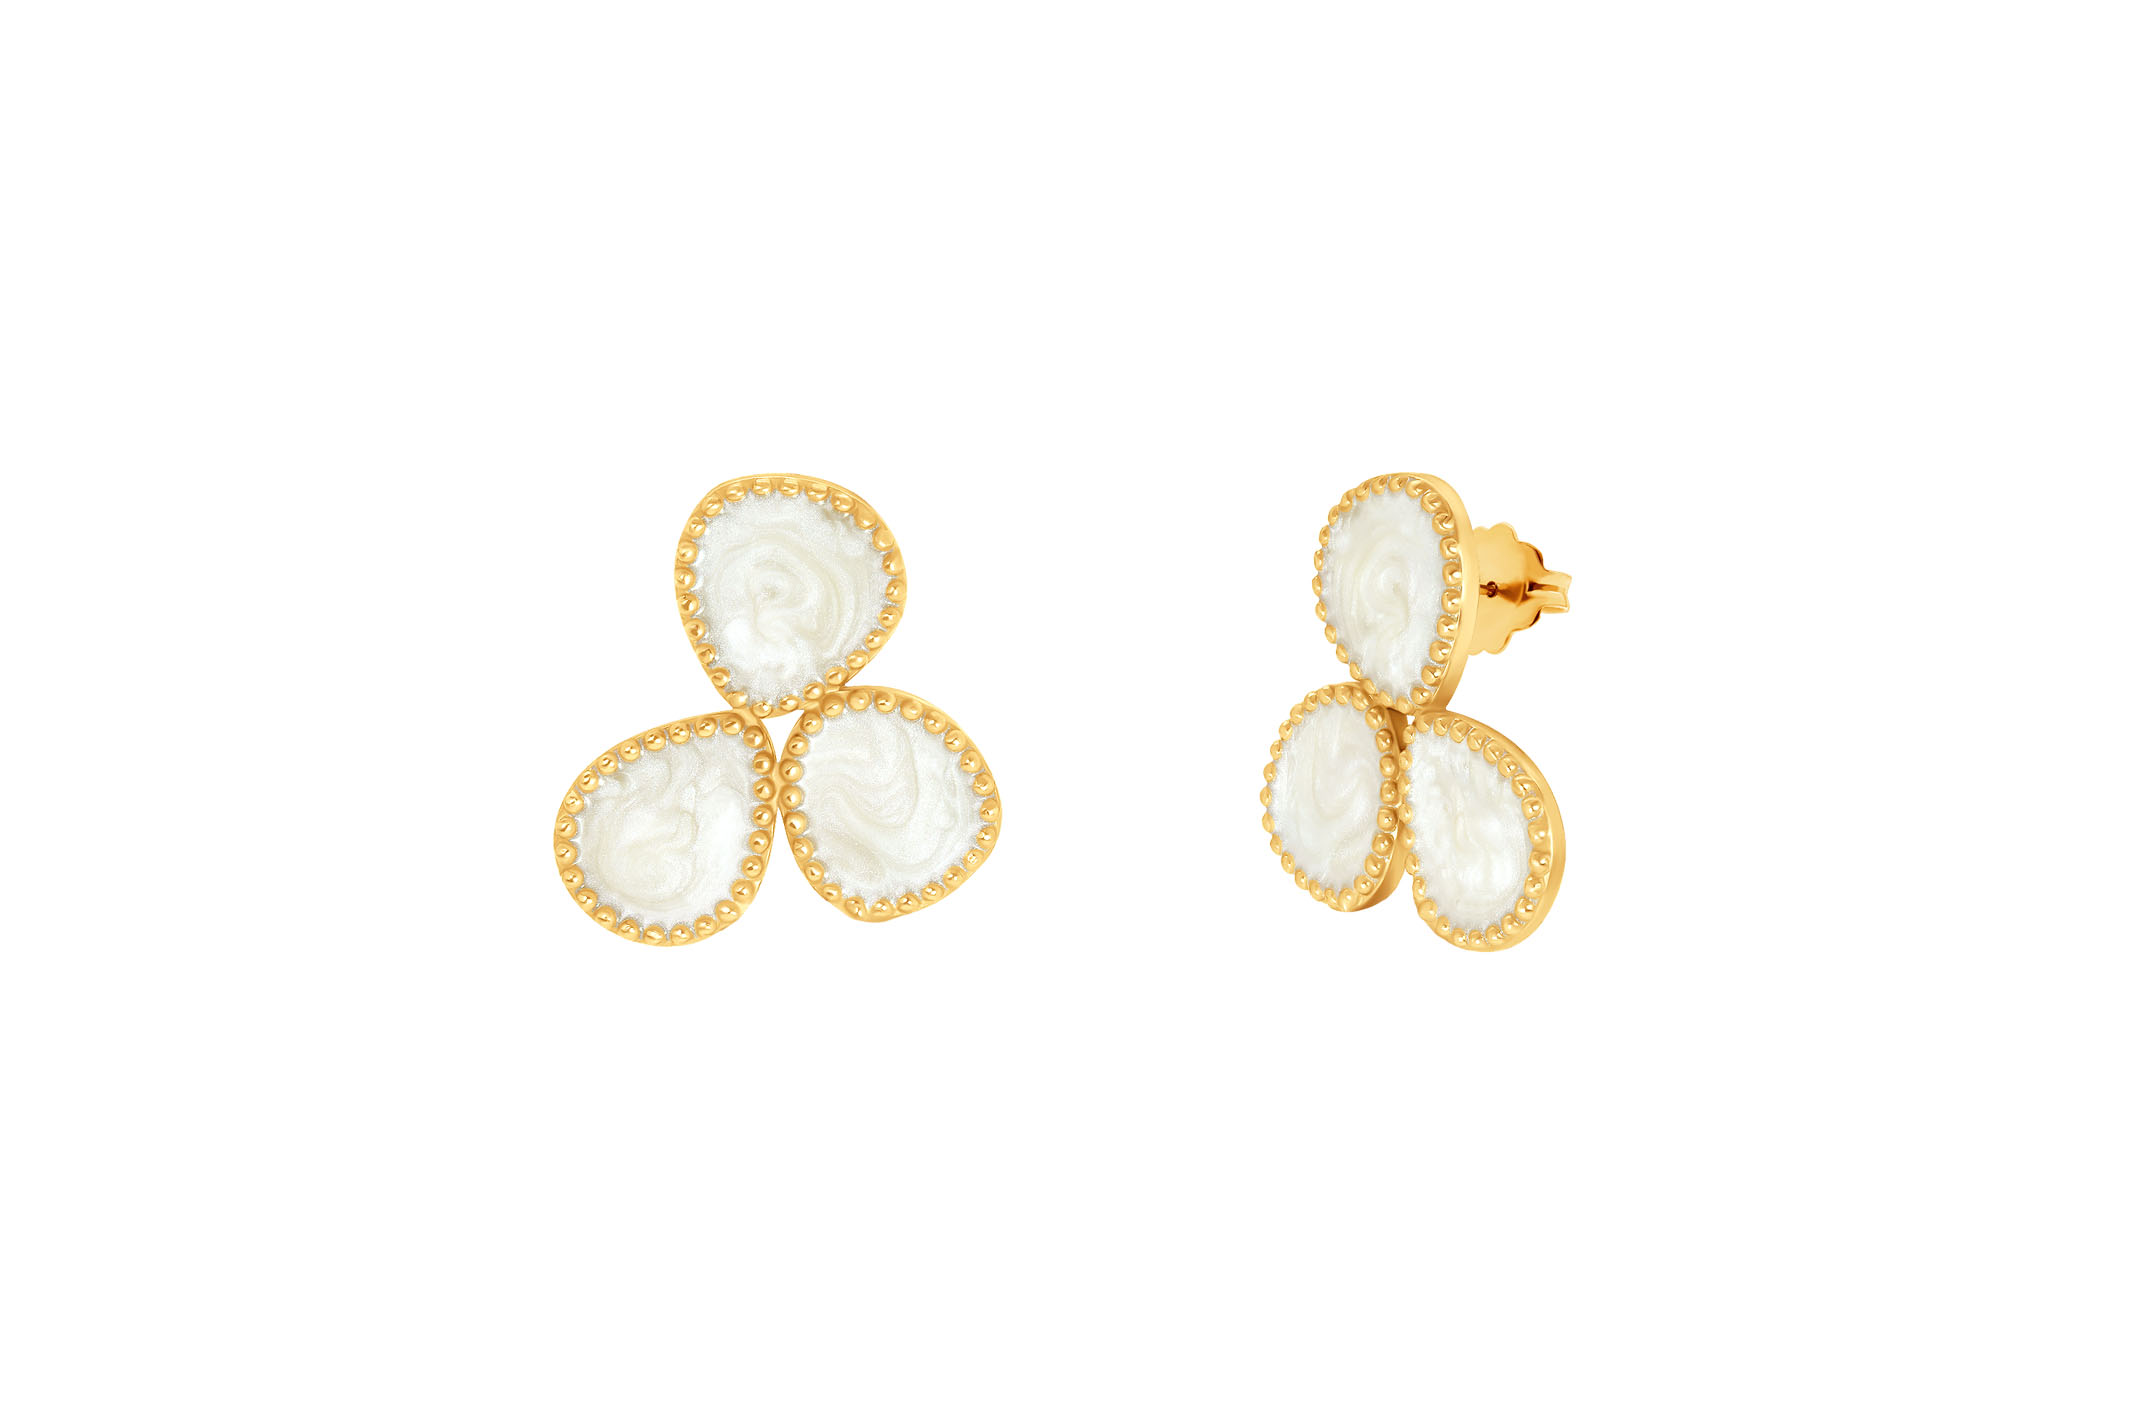 Jewel: earrings;Material: 925 silver;Weight: 4.8 gr;Finish: enamel;Color: yellow;Size: 2 cm;Gender: woman